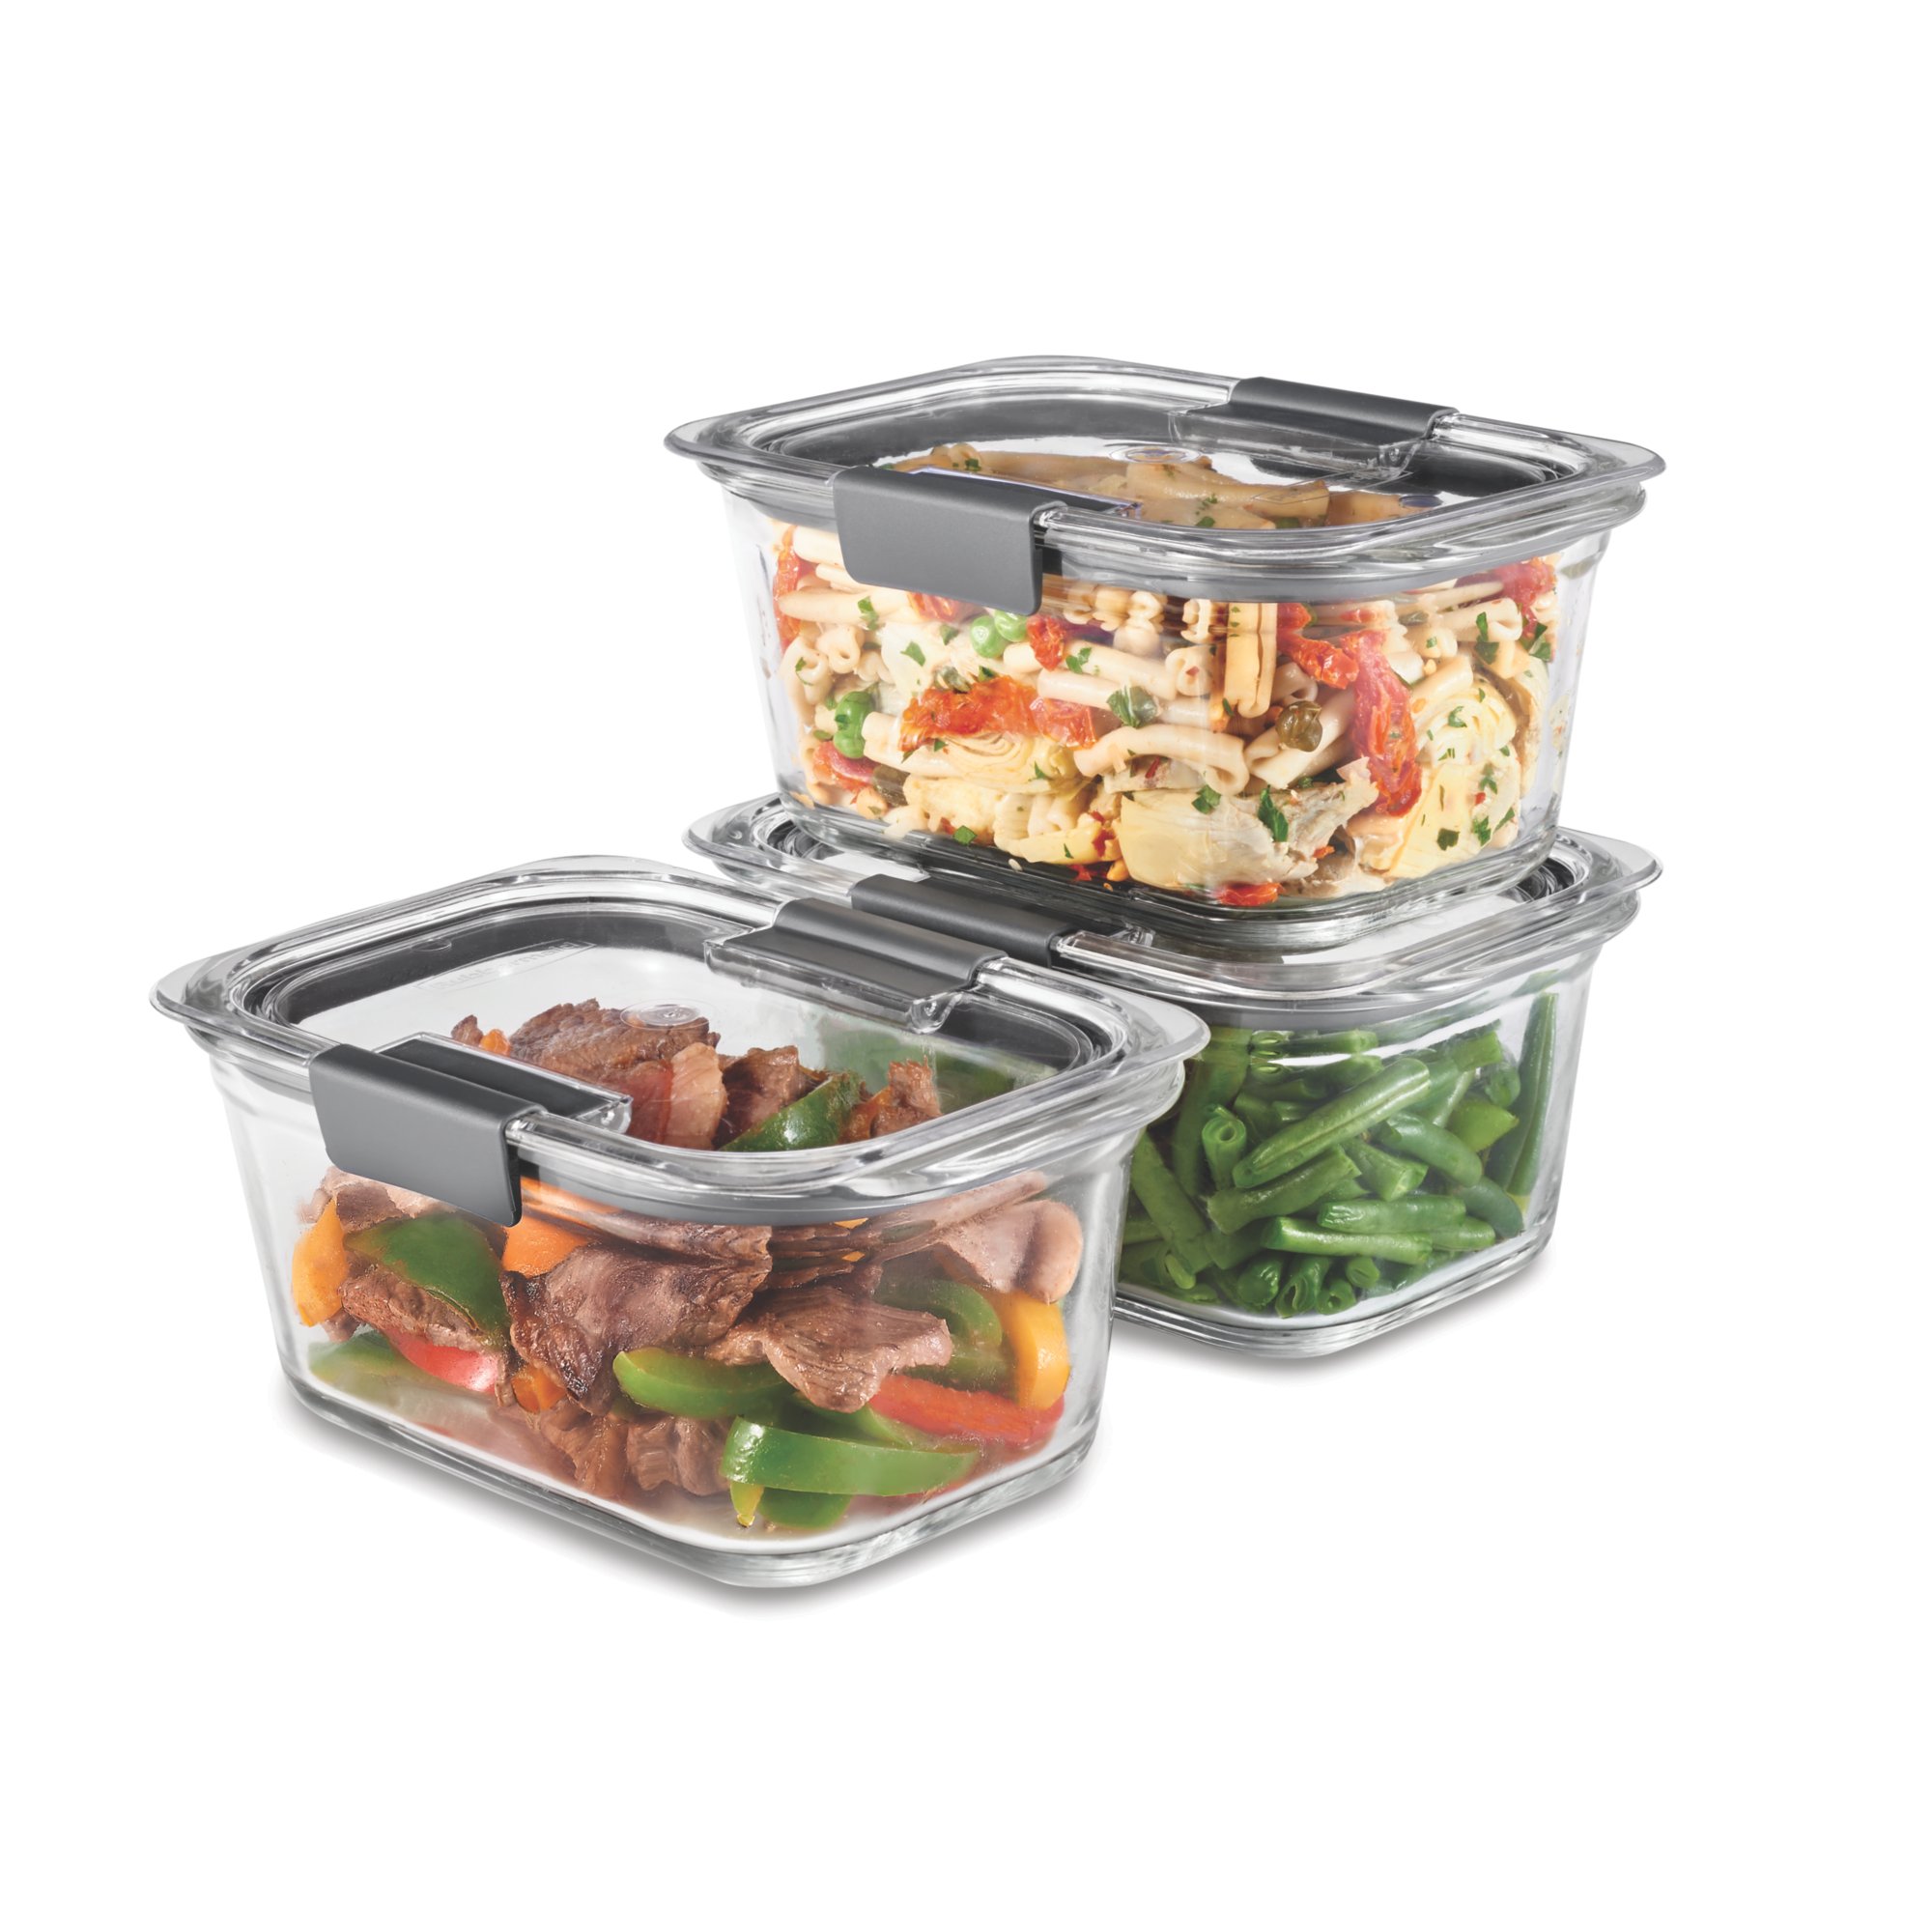 https://s7d9.scene7.com/is/image/NewellRubbermaid/2118305-rubbermaid-food-storage-brilliance-glass-clear-3pk-4.7c-with-food-angle?wid=2000&hei=2000